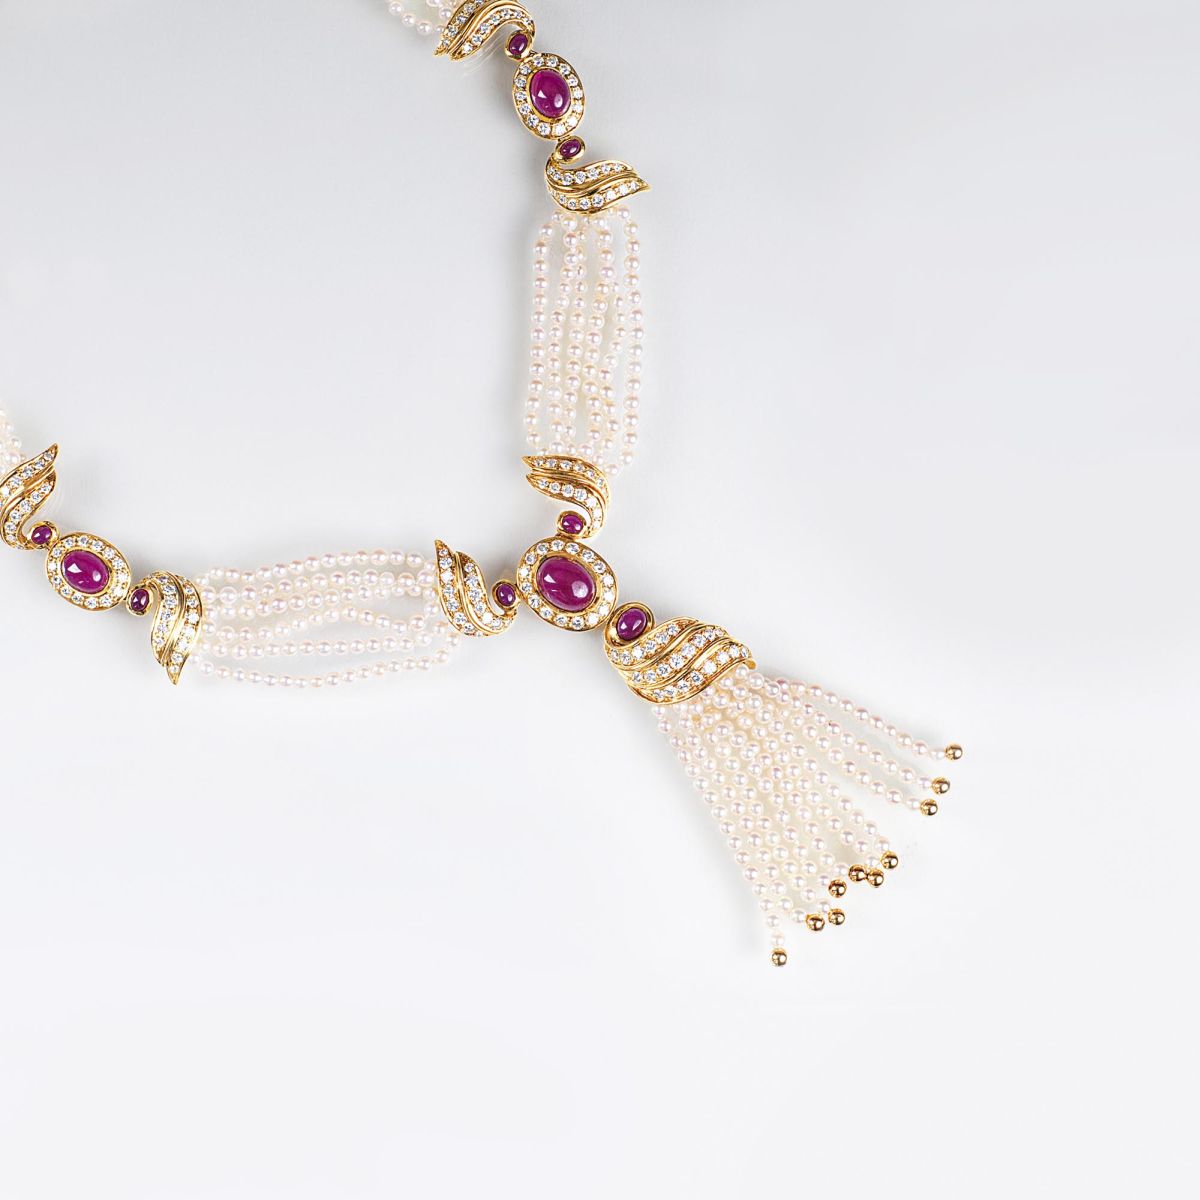 A highquality Pearl Necklace with Diamonds and Rubies